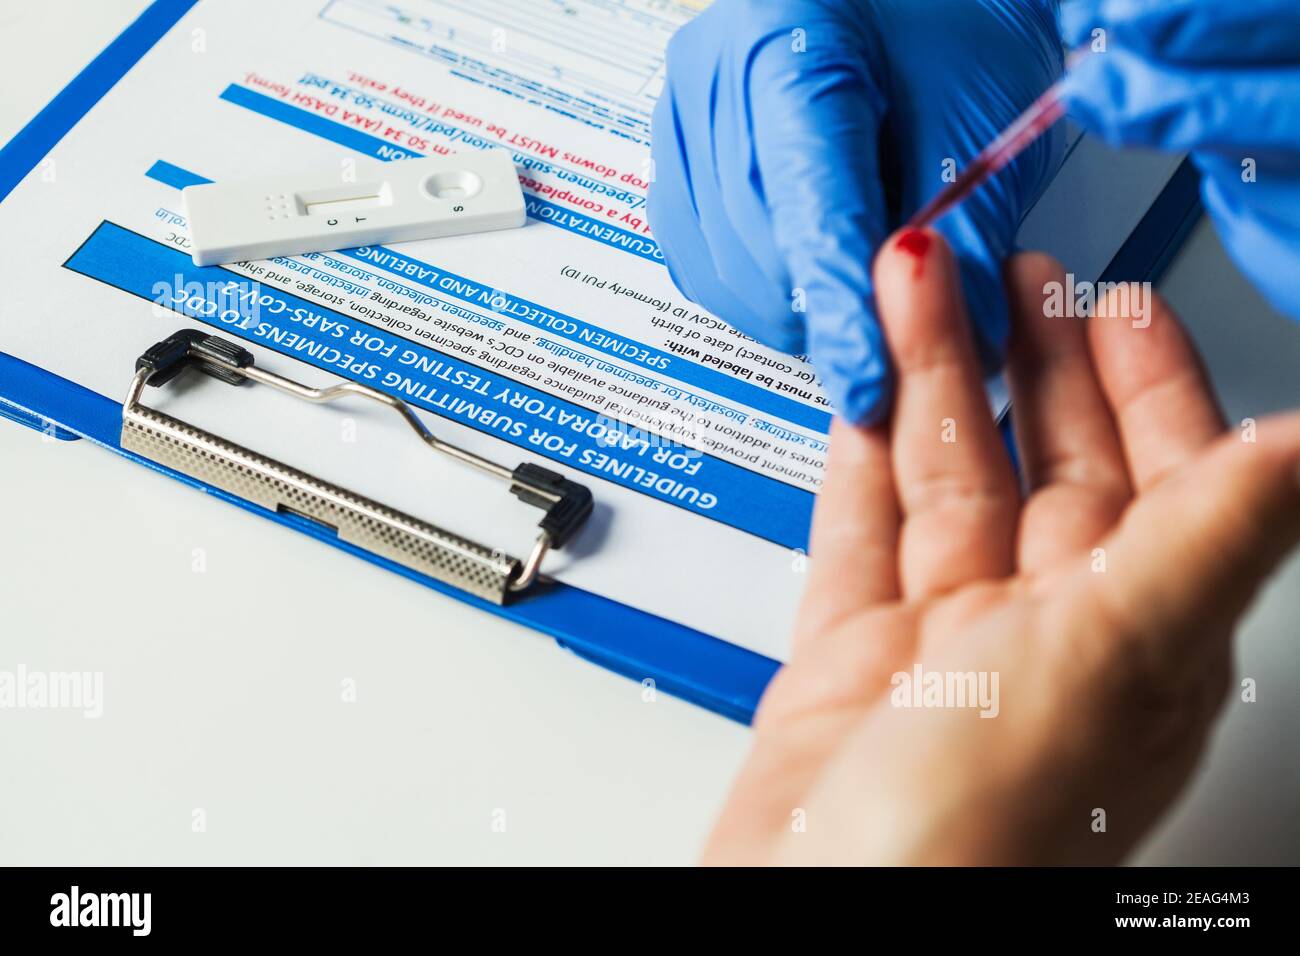 Healthcare professional performing Coronavirus COVID-19 rapid testing,fingerprick blood sample collection,point of care testing for providing same day Stock Photo